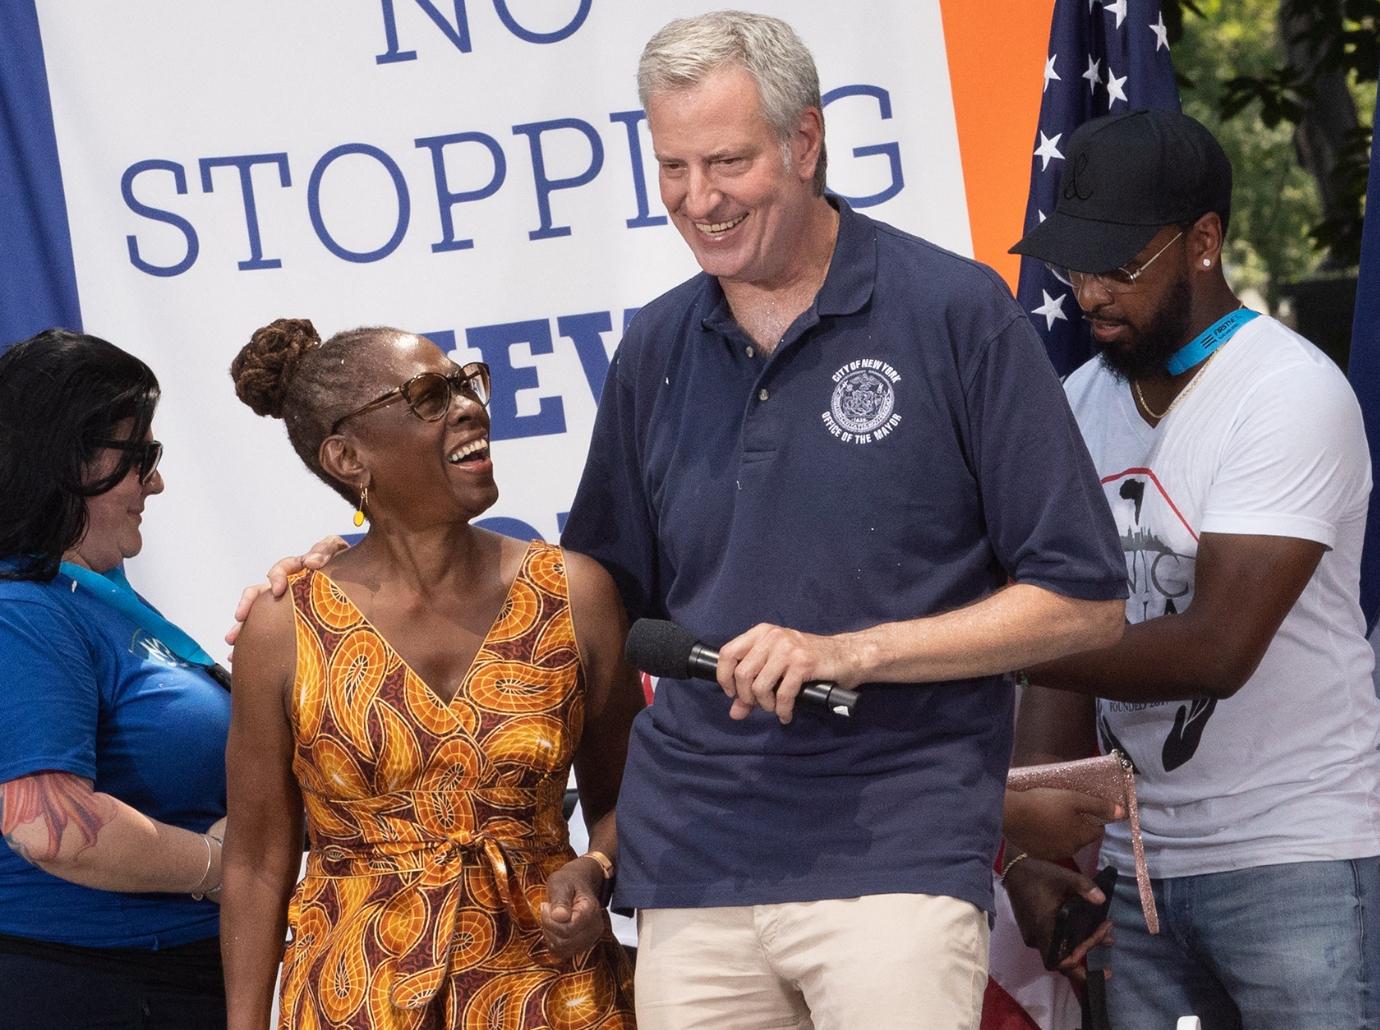 NYC Mayor Bill de Blasio, while wearing a NY Knicks hat, calls out